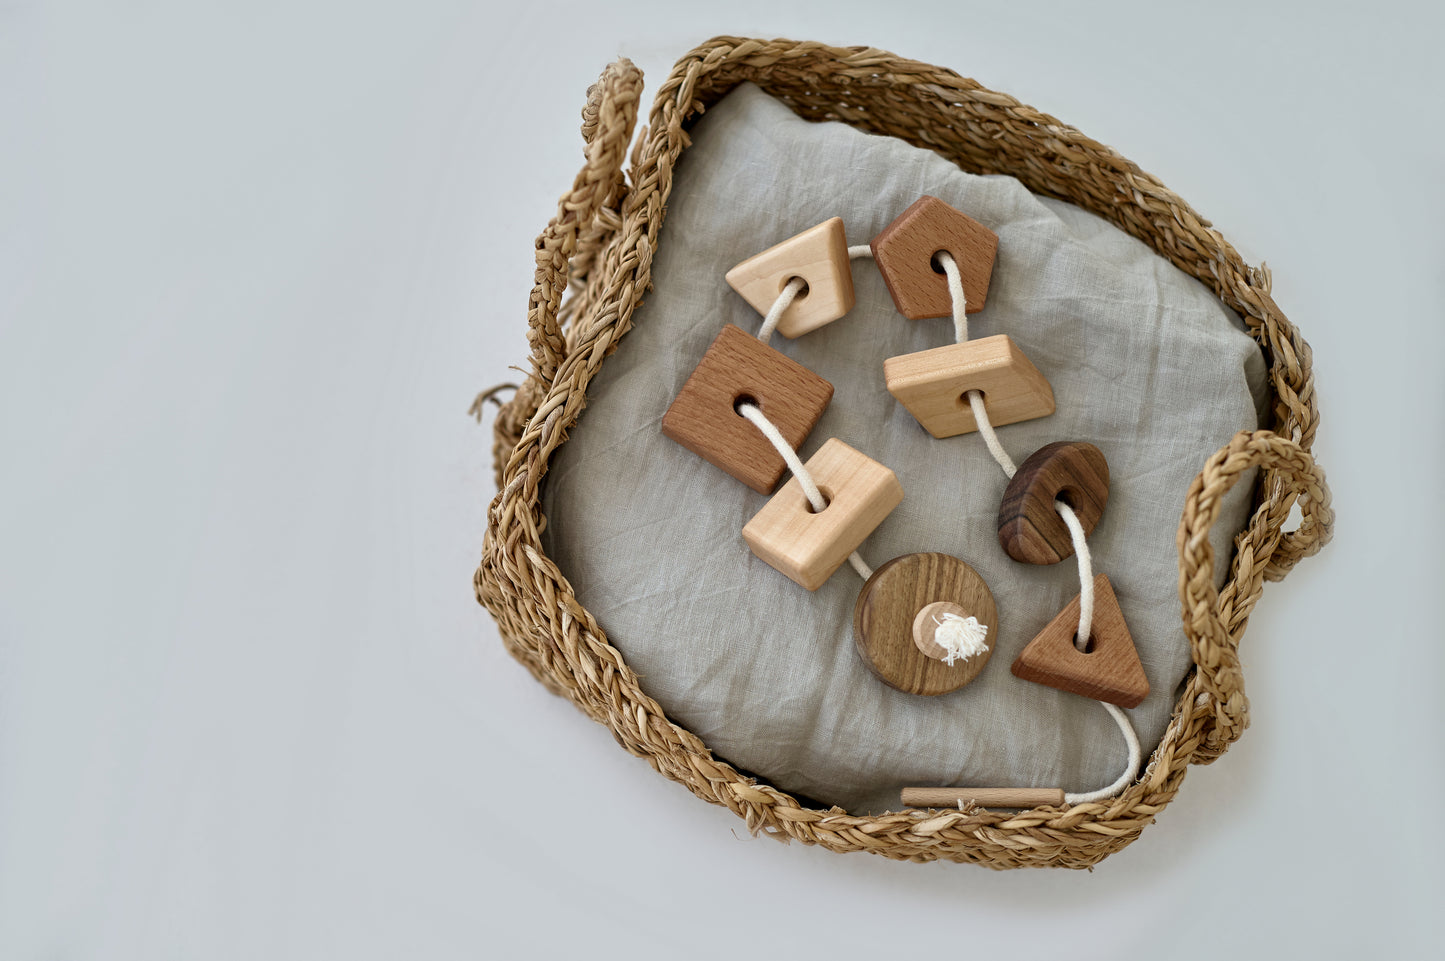 Wooden Lacing Toy with Geometry Shapes